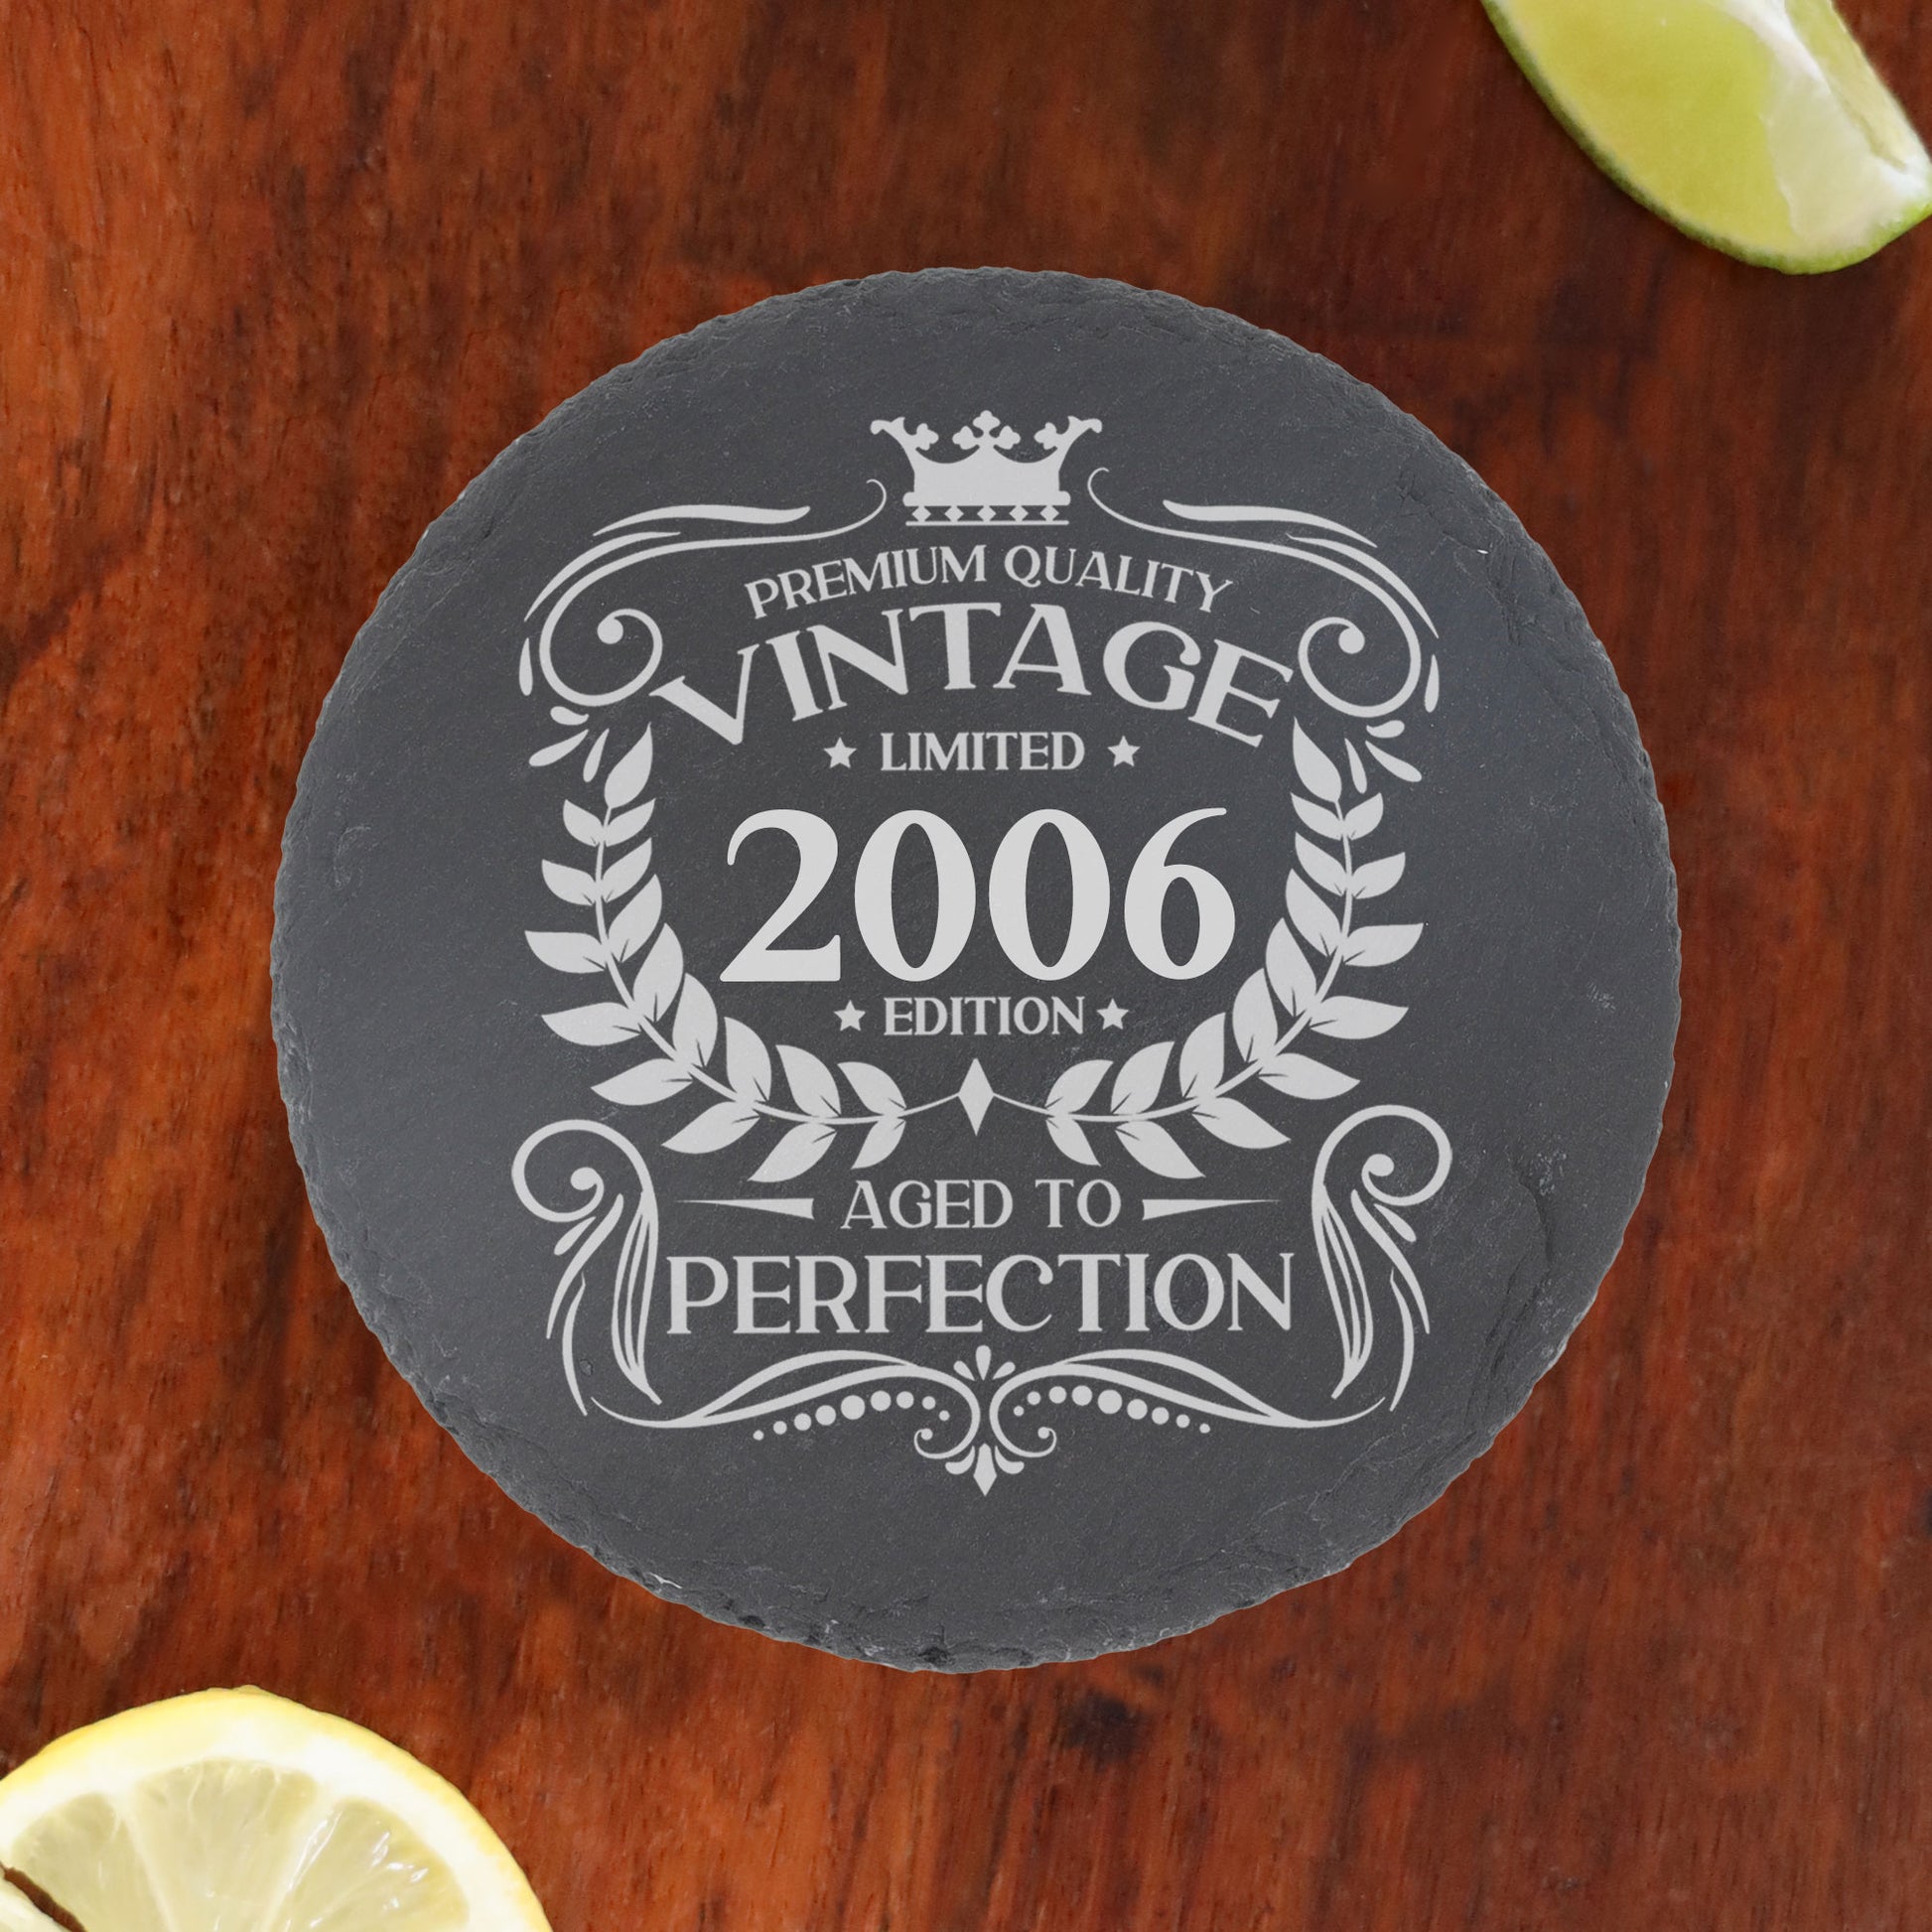 Personalised Vintage 2006 Mug and/or Coaster  - Always Looking Good - Round Coaster On Its Own  